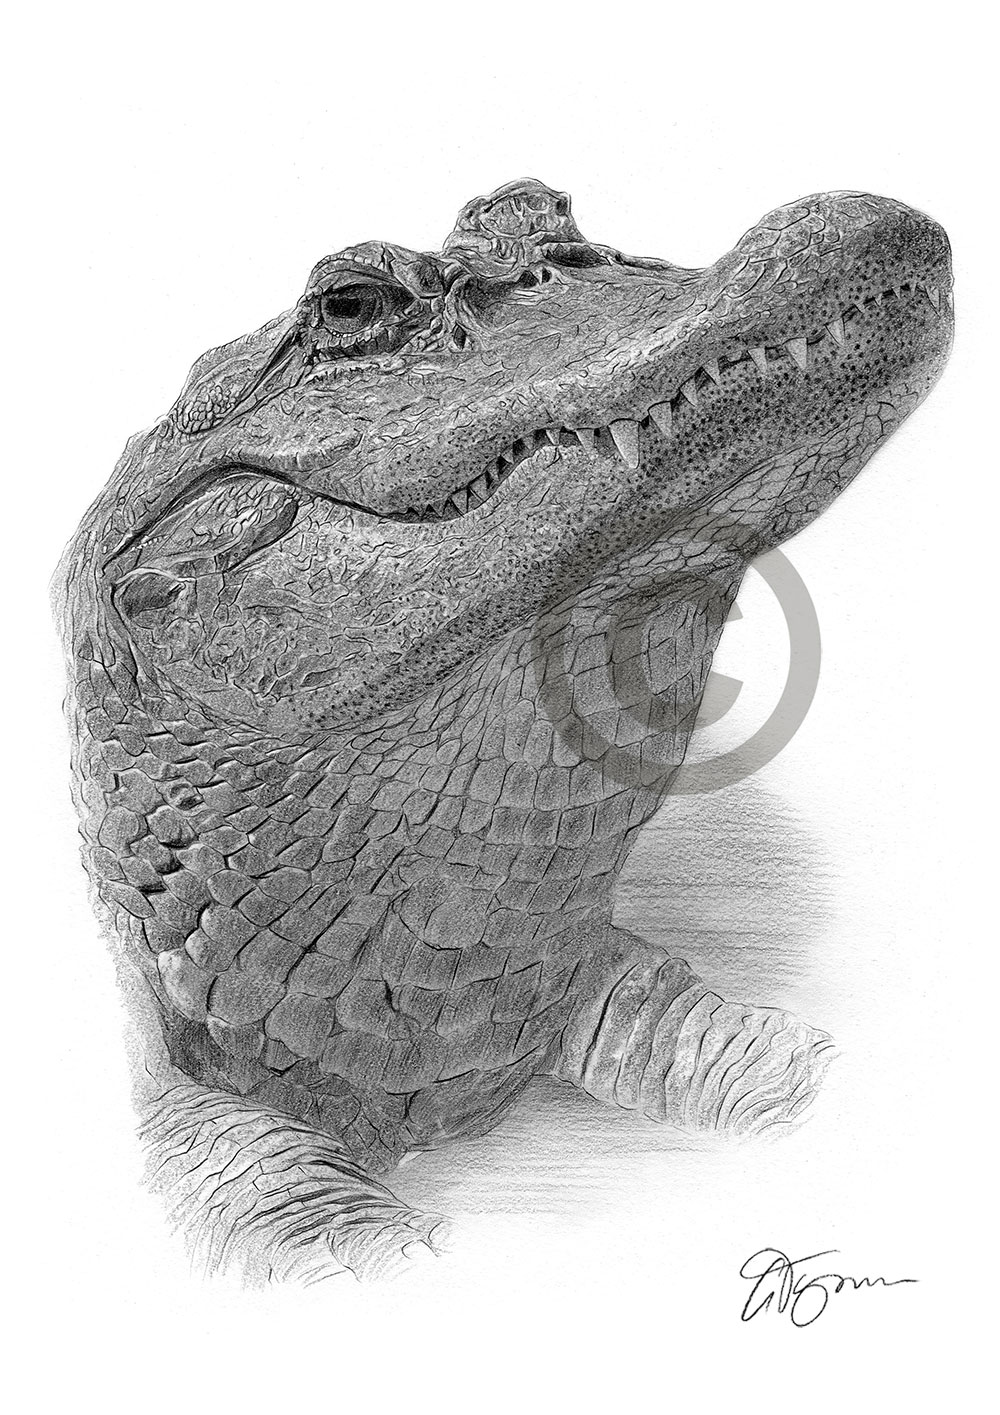 Pencil drawing of an alligator by artist Gary Tymon